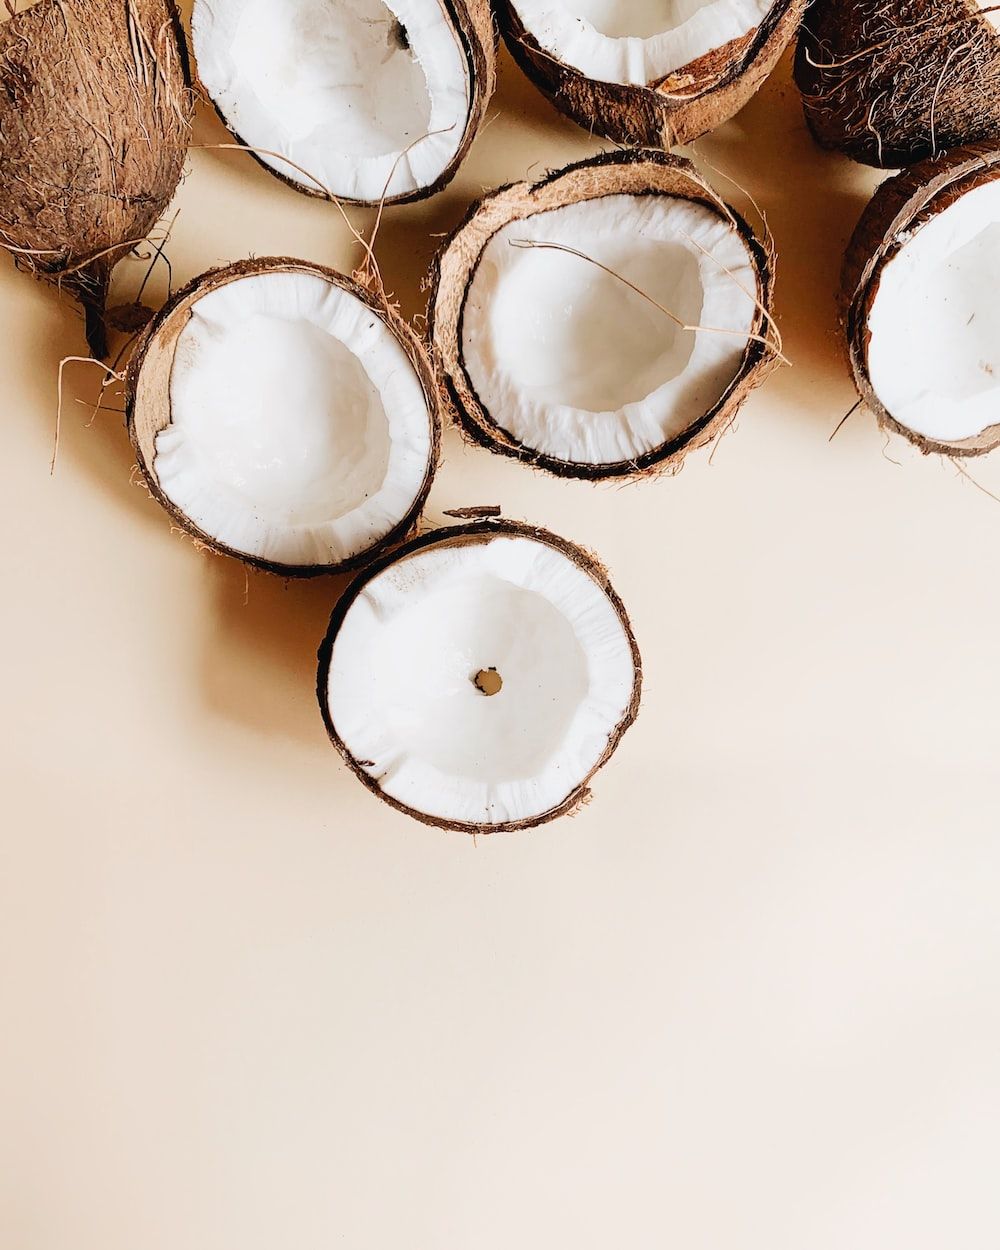 Coconut Picture. Download Free Image